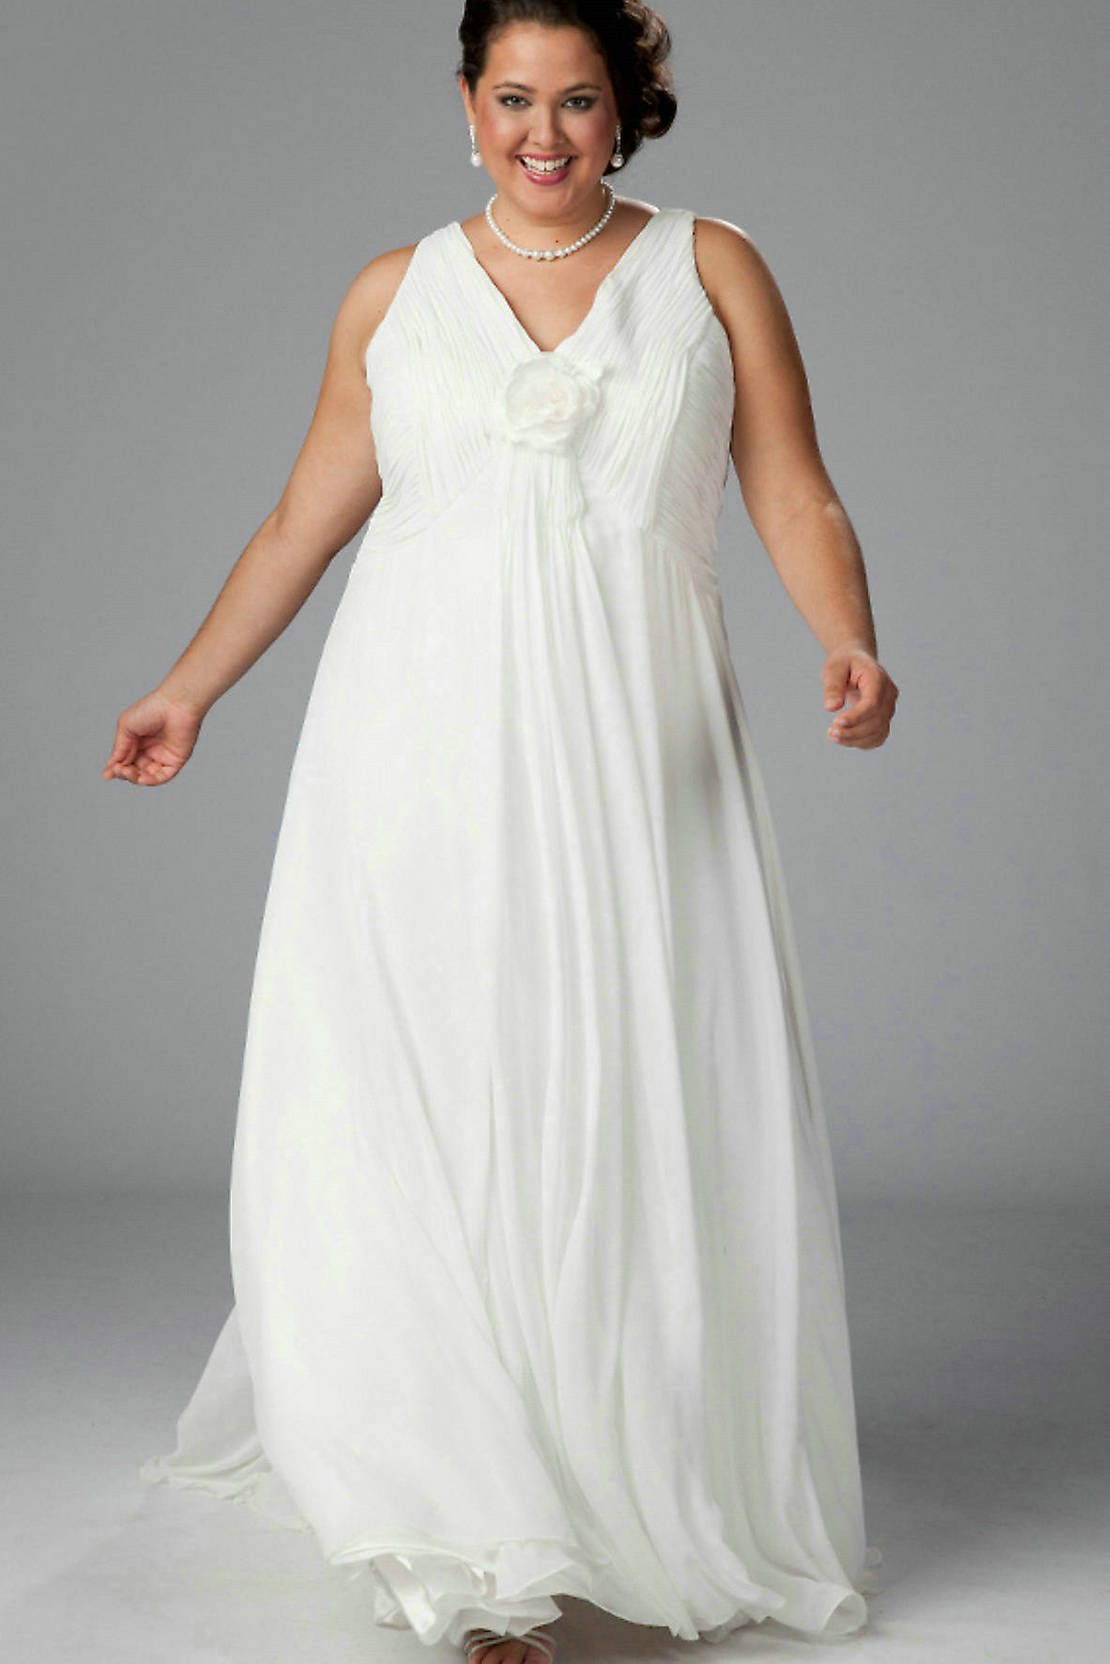 White Dresses For Graduation Plus Size : Spring Style